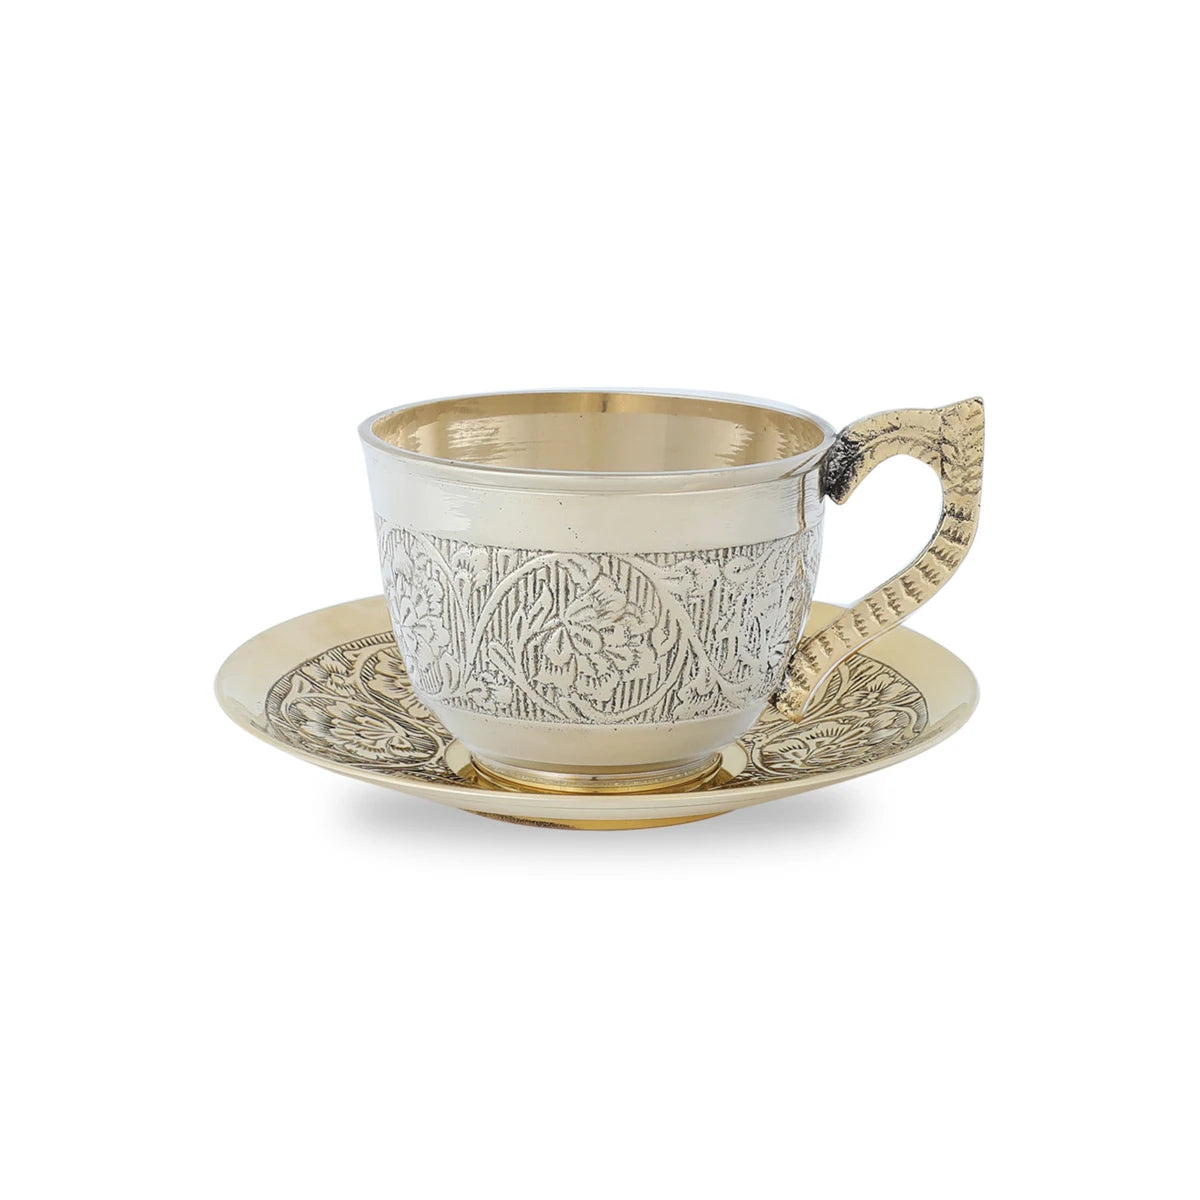 Gold Colored Metallic Tea/Coffee Cup Handmade of Brass With Floristic Engravings